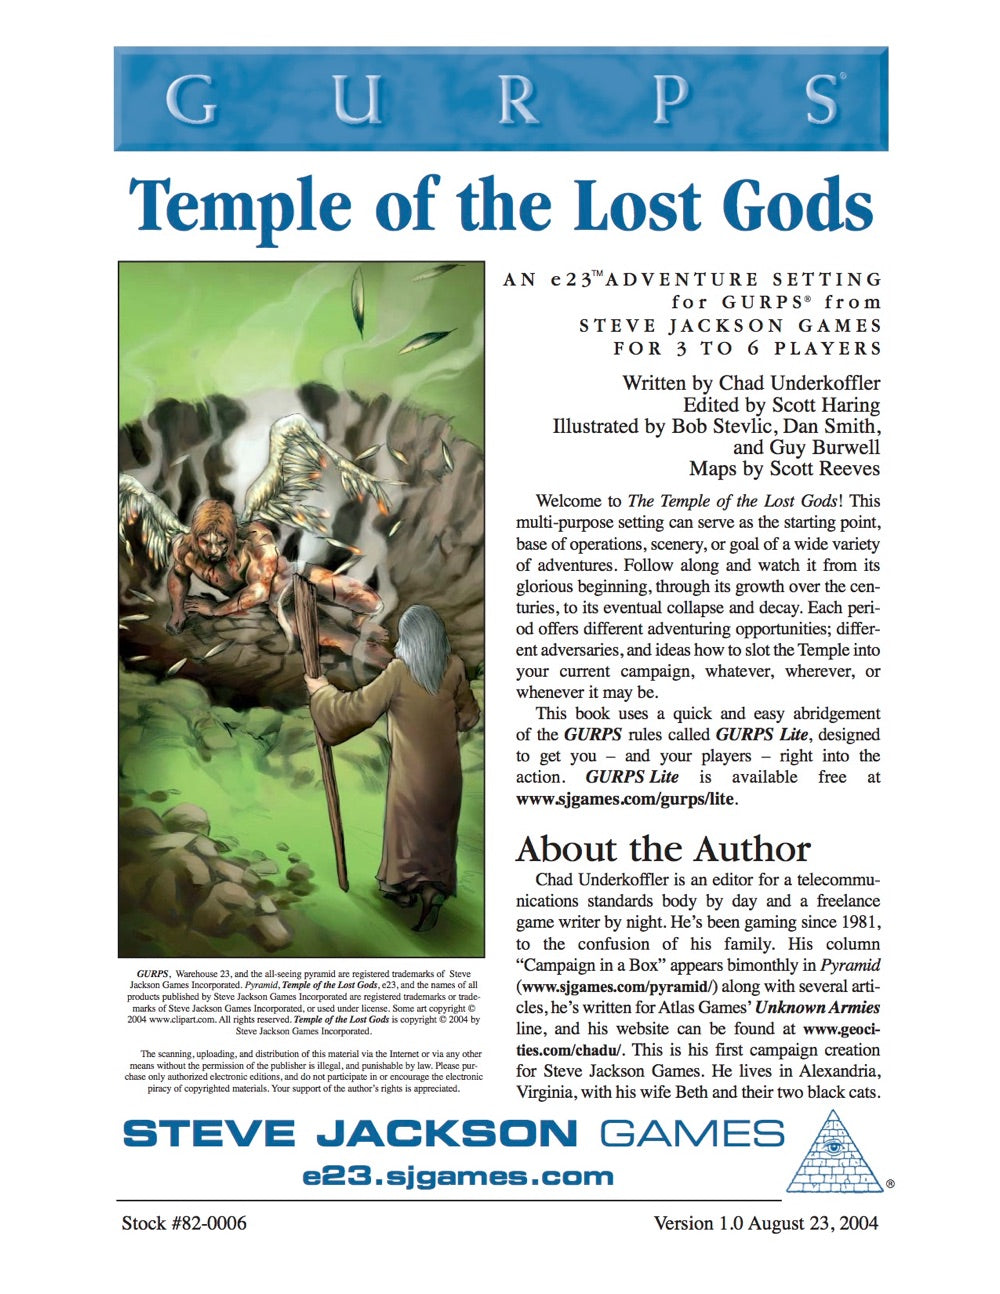 GURPS Classic: Temple of the Lost Gods